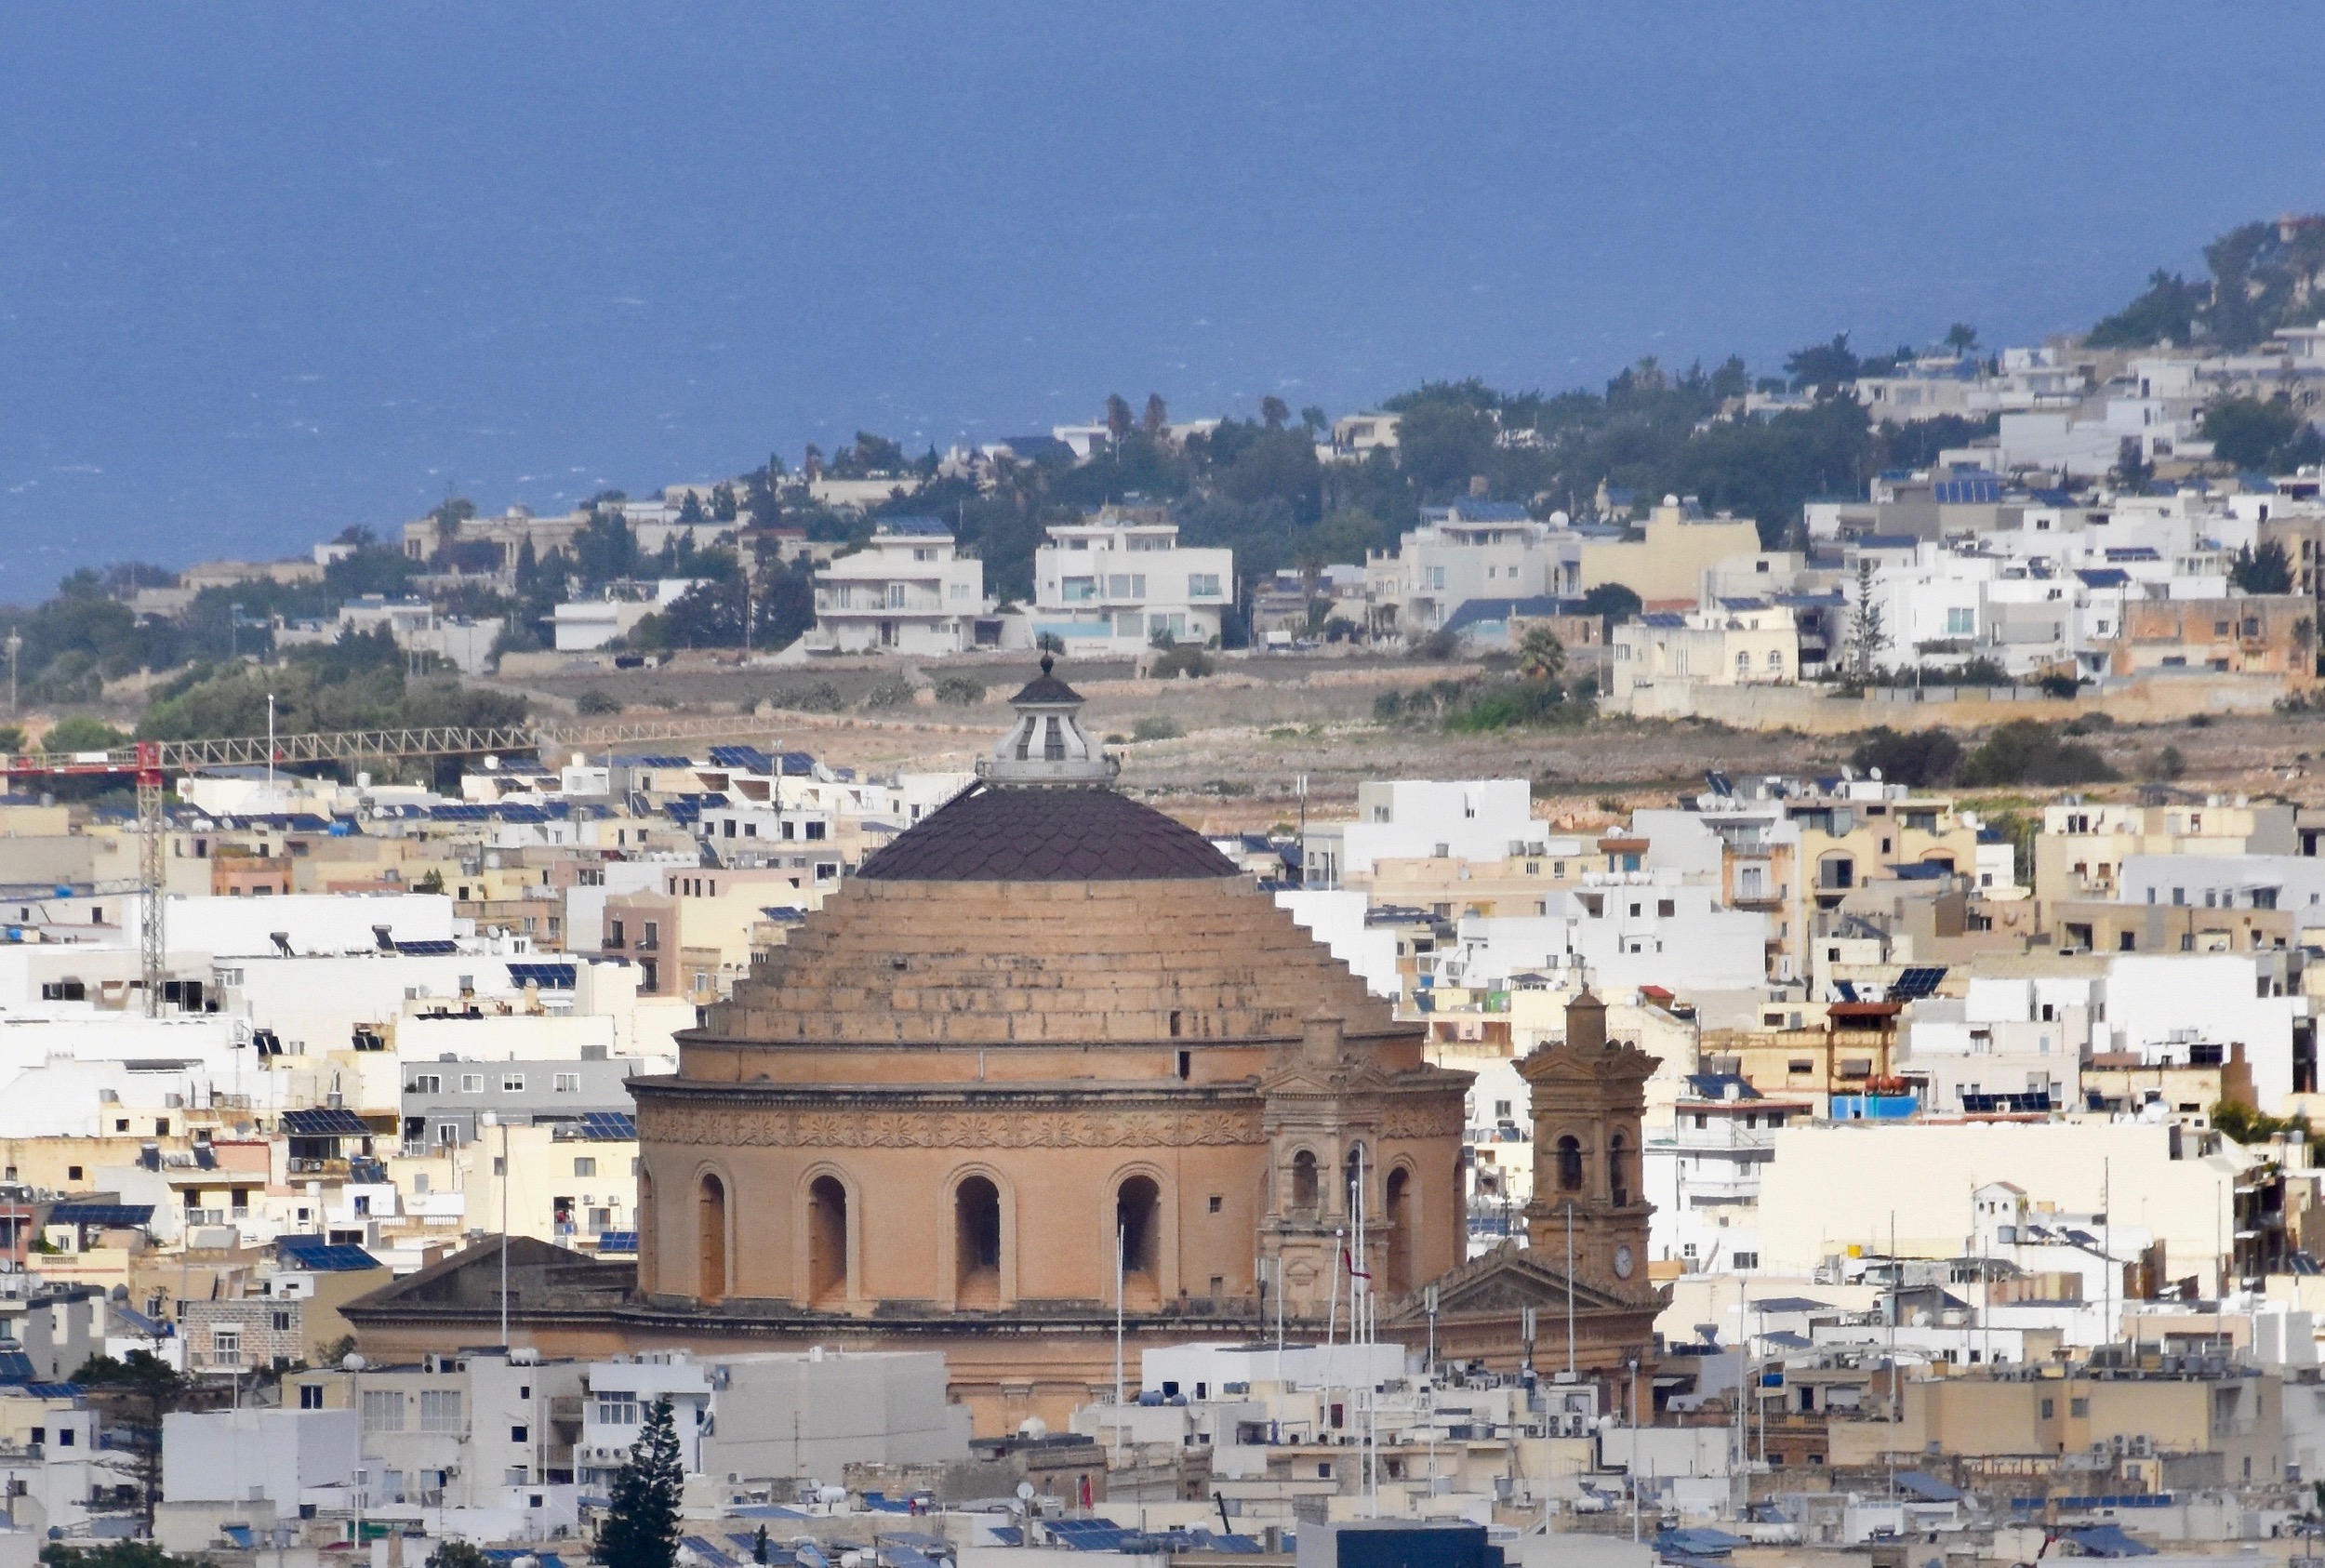 View of Mostra from Mdina